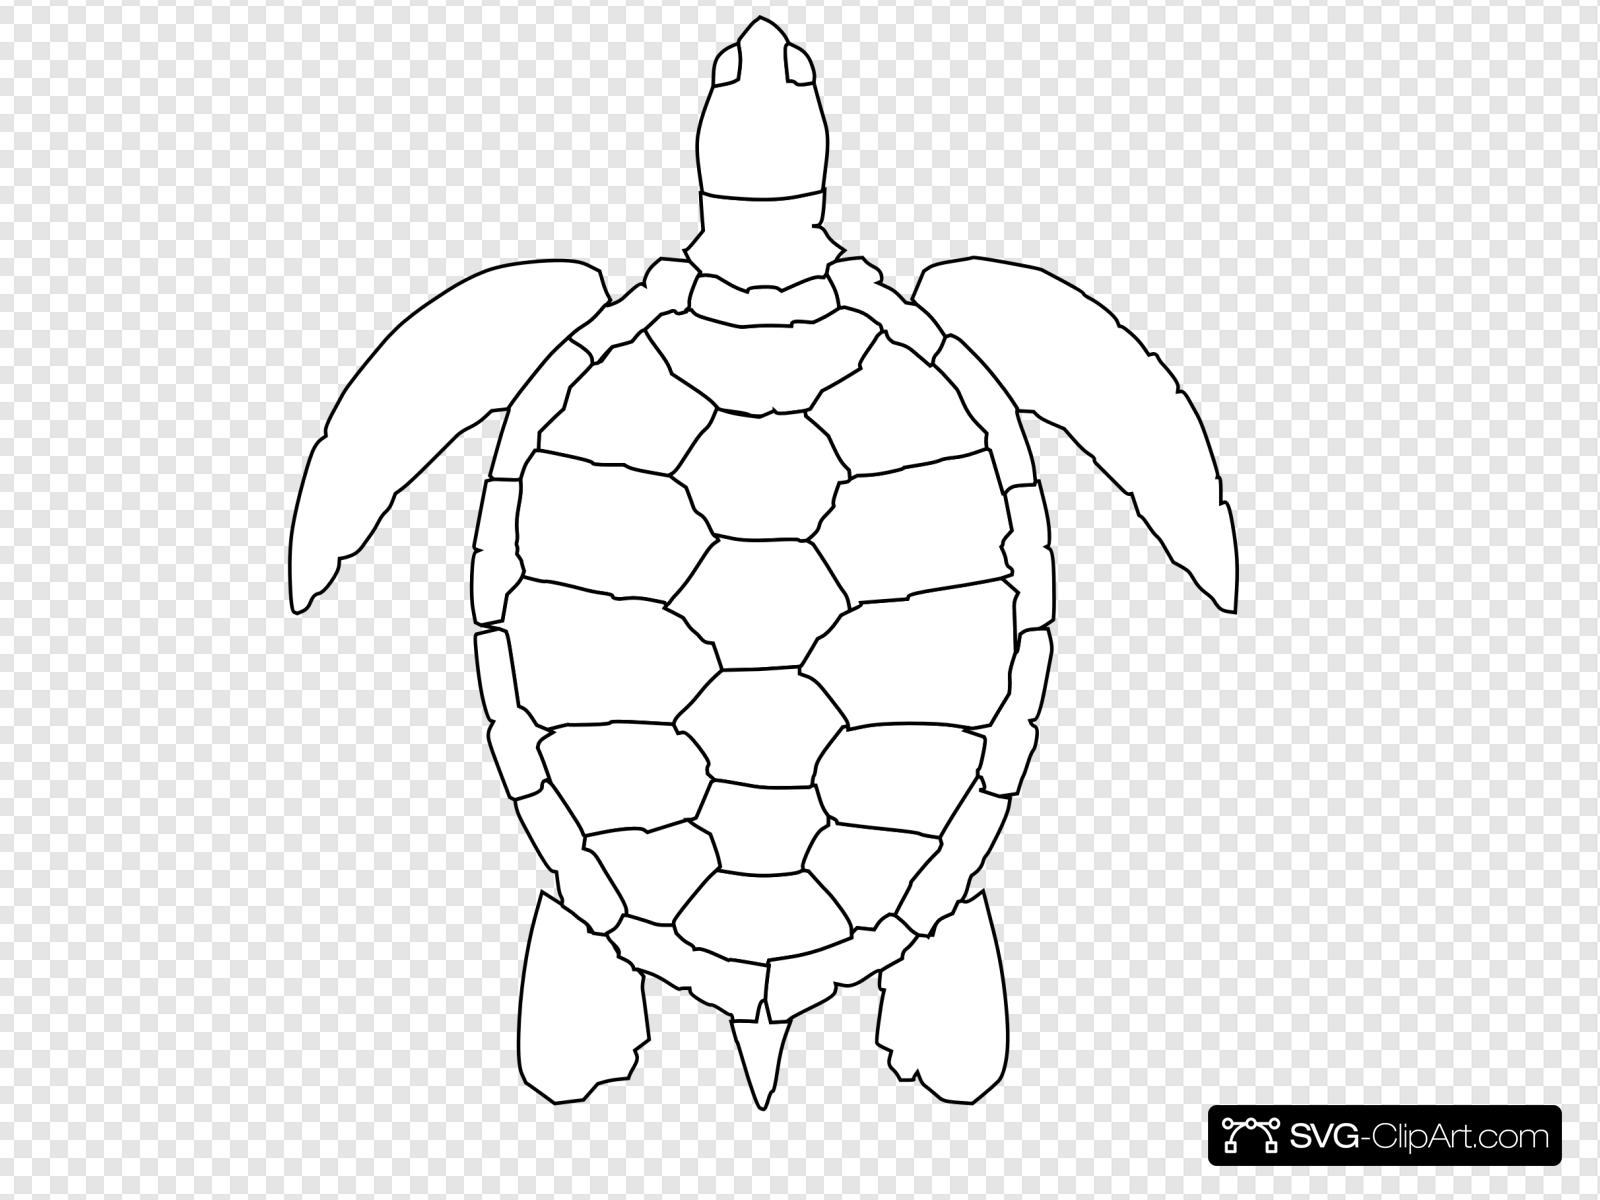 Turtle Outline Clip art, Icon and SVG